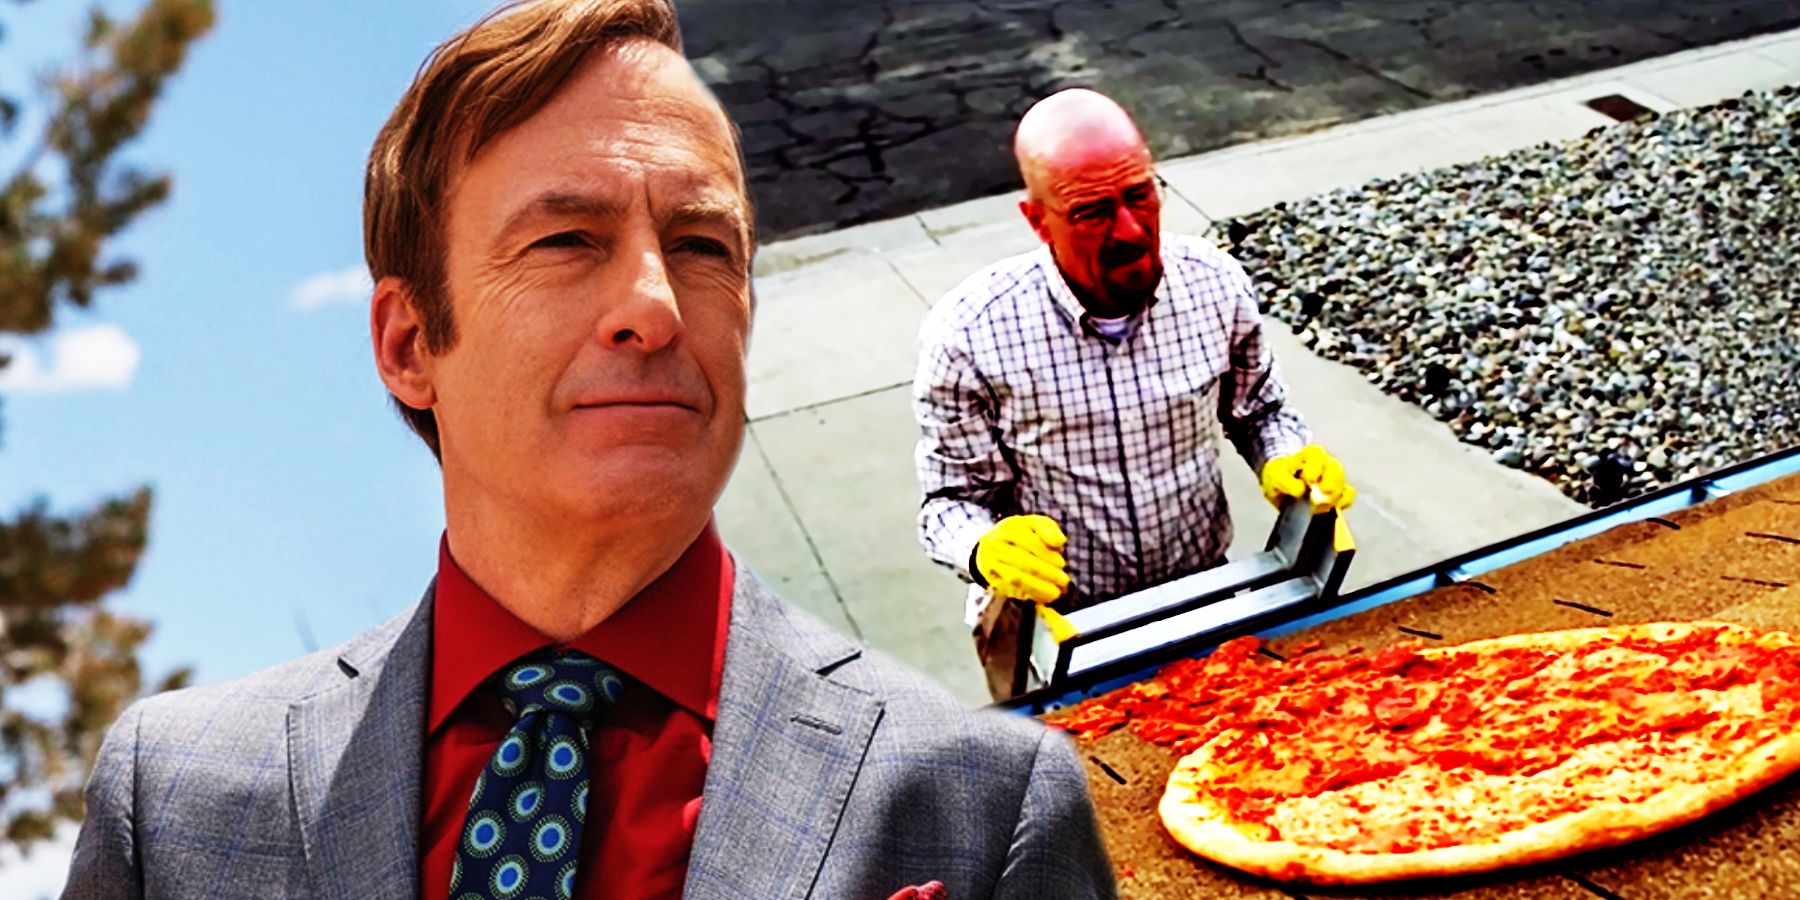 Better Call Saul Cleverly Continued Breaking Bad's 